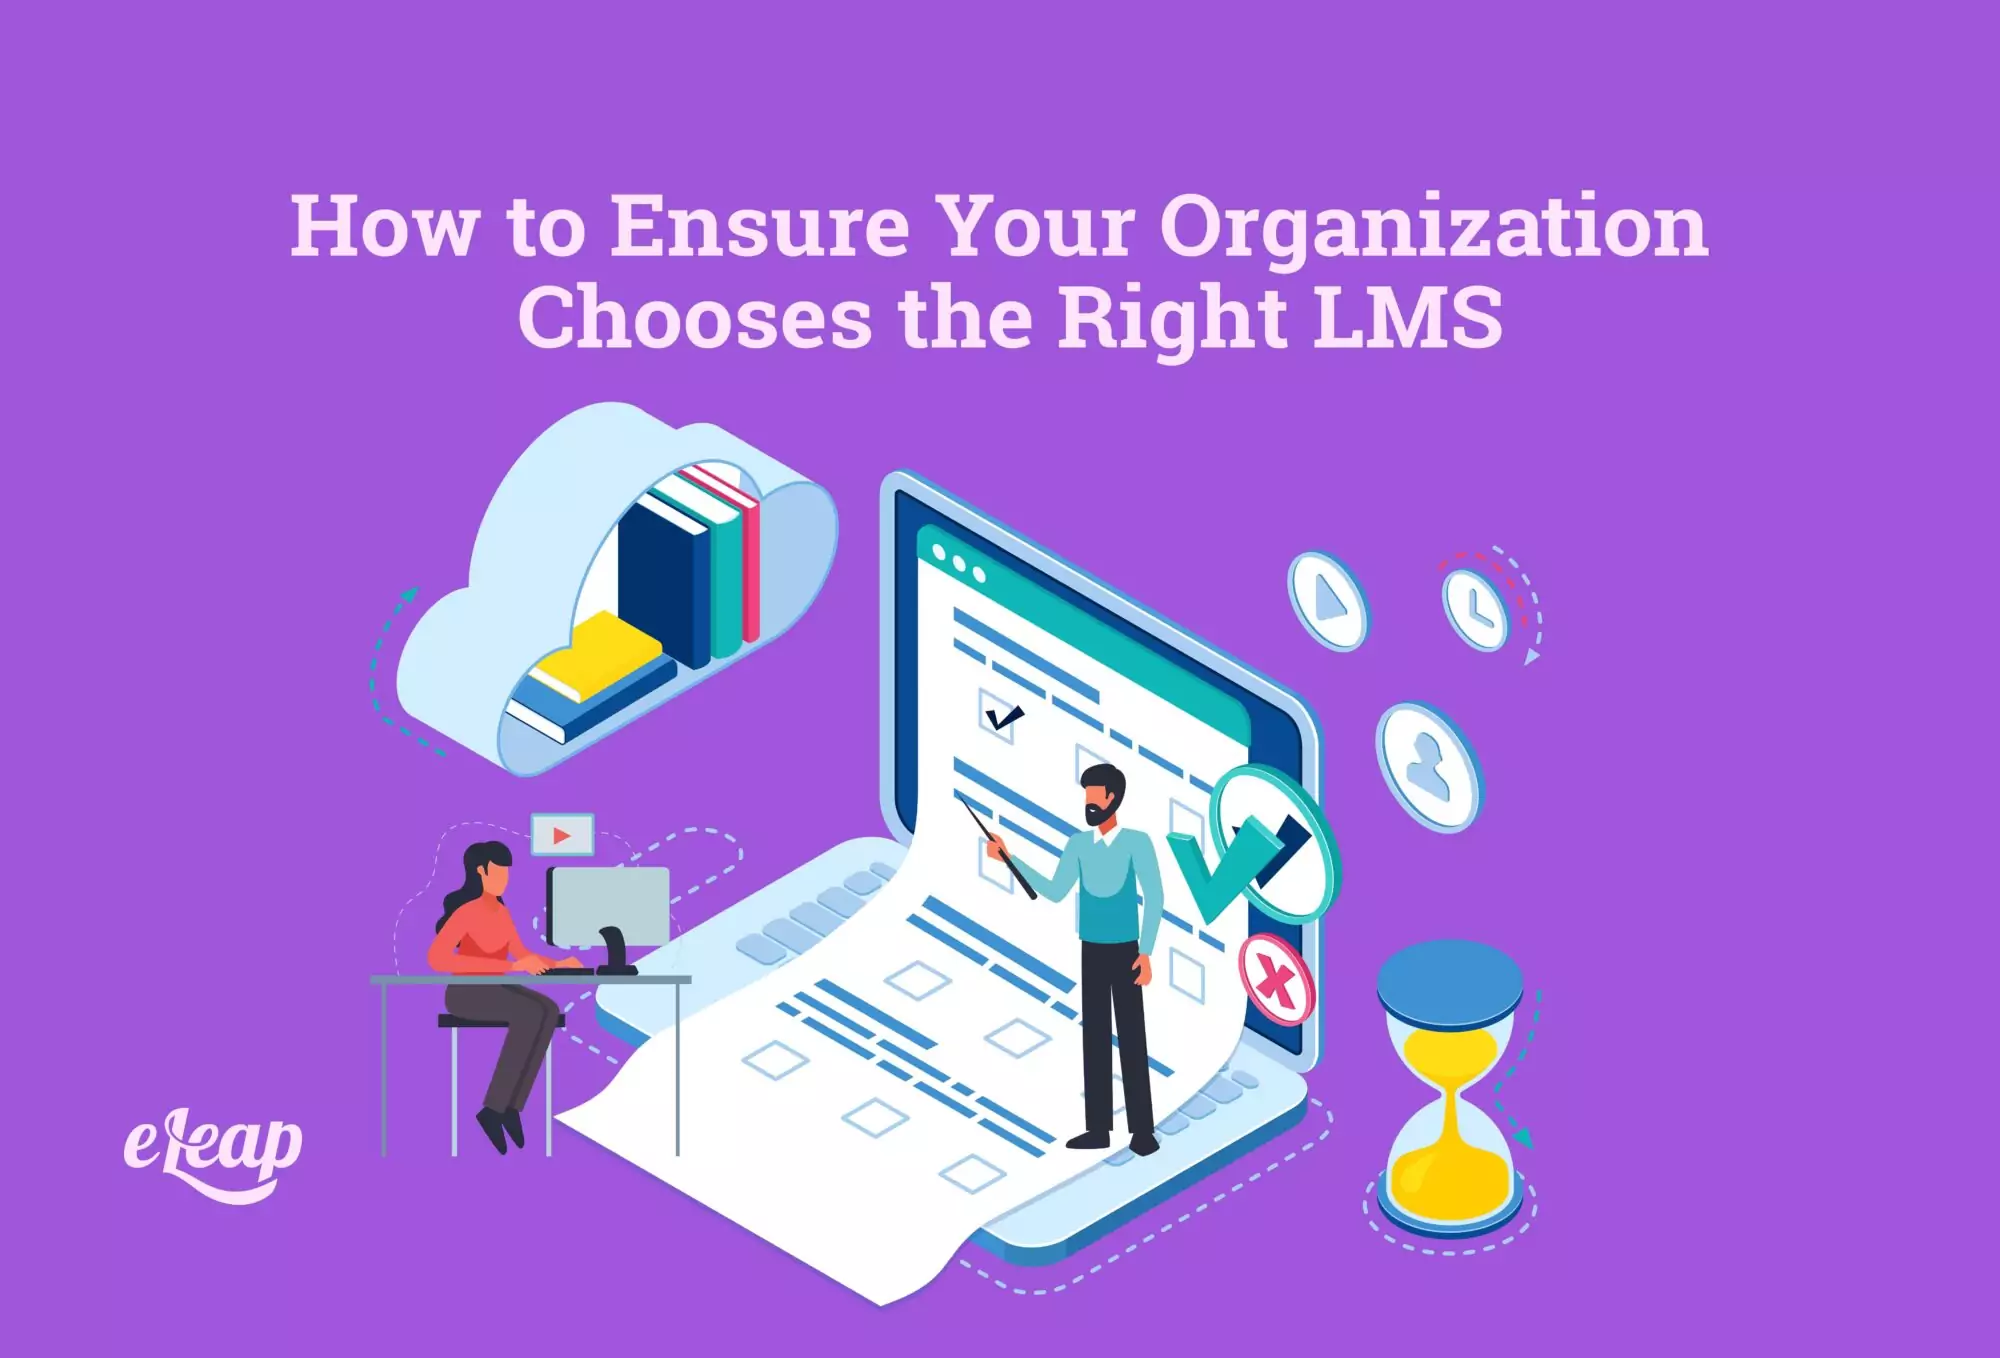 How to Ensure Your Organization Chooses the Right LMS